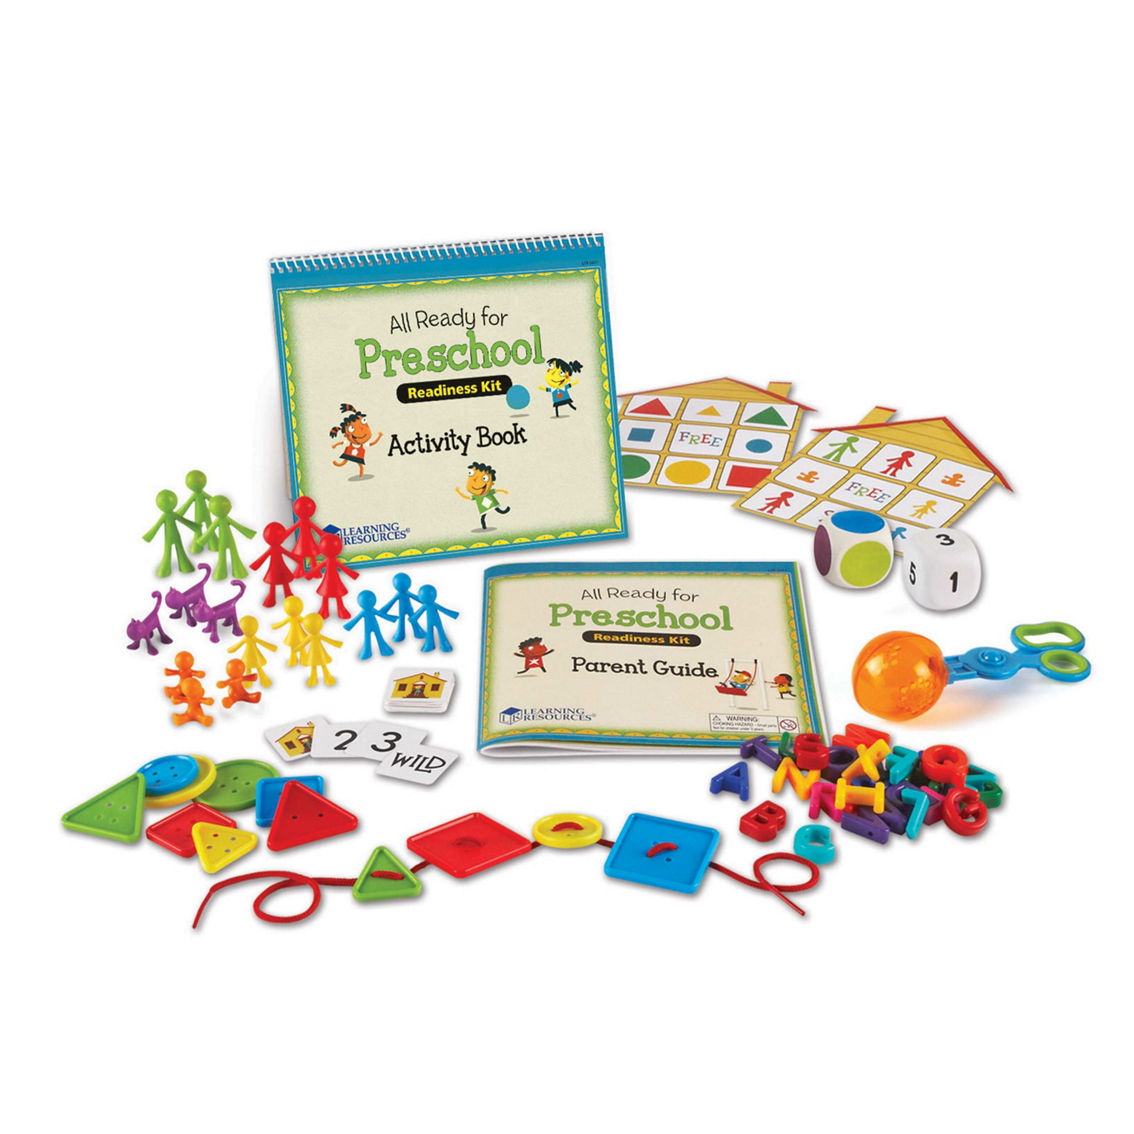 Learning Resources Learning Essentials - All Ready for Preschool Readiness Kit - Image 2 of 3